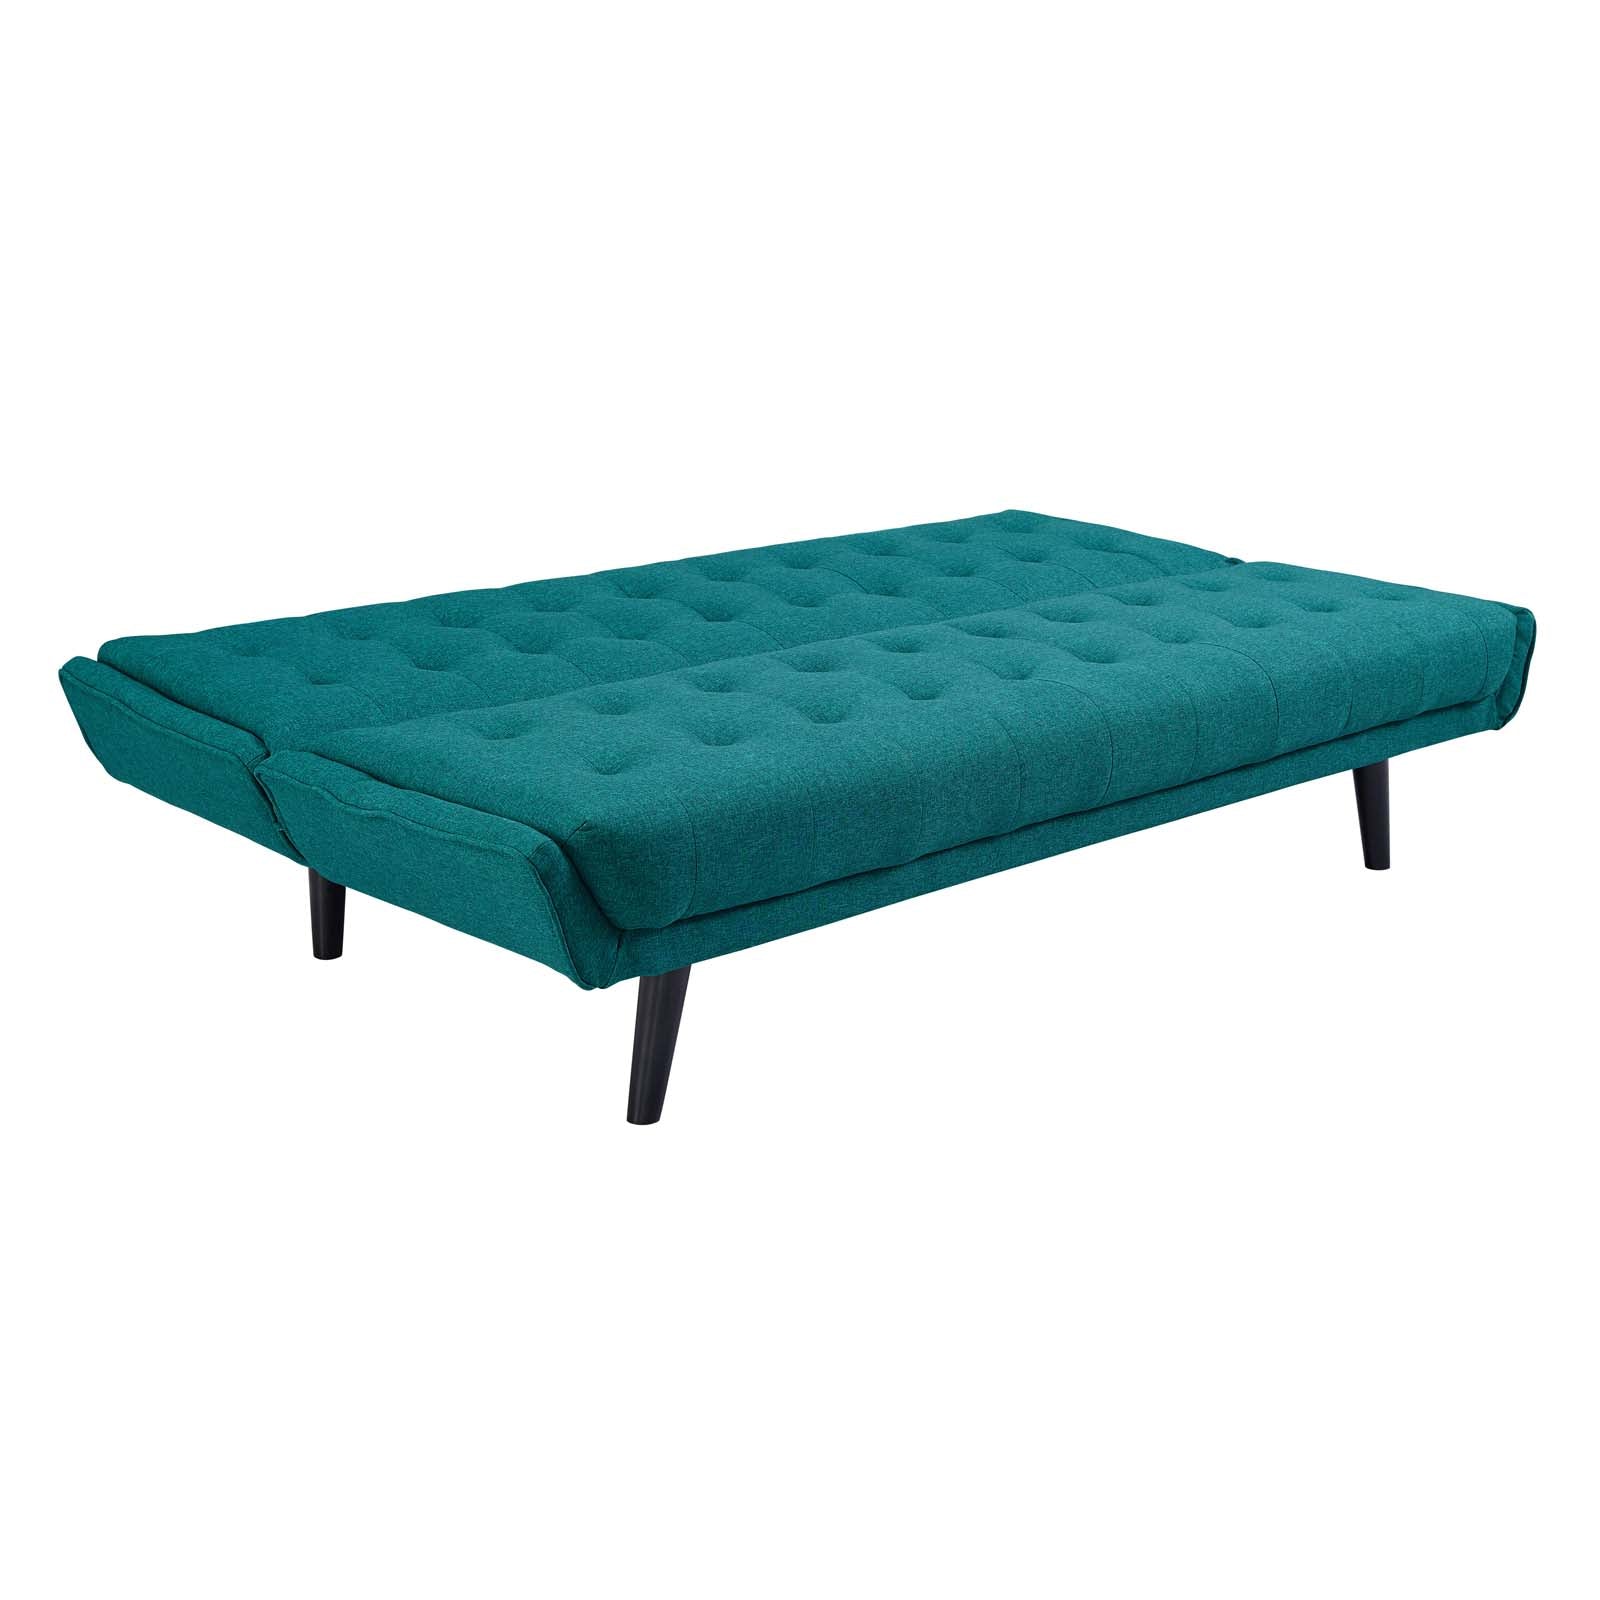 Modway Sofas & Couches - Glance Tufted Convertible Fabric Sofa Bed Teal